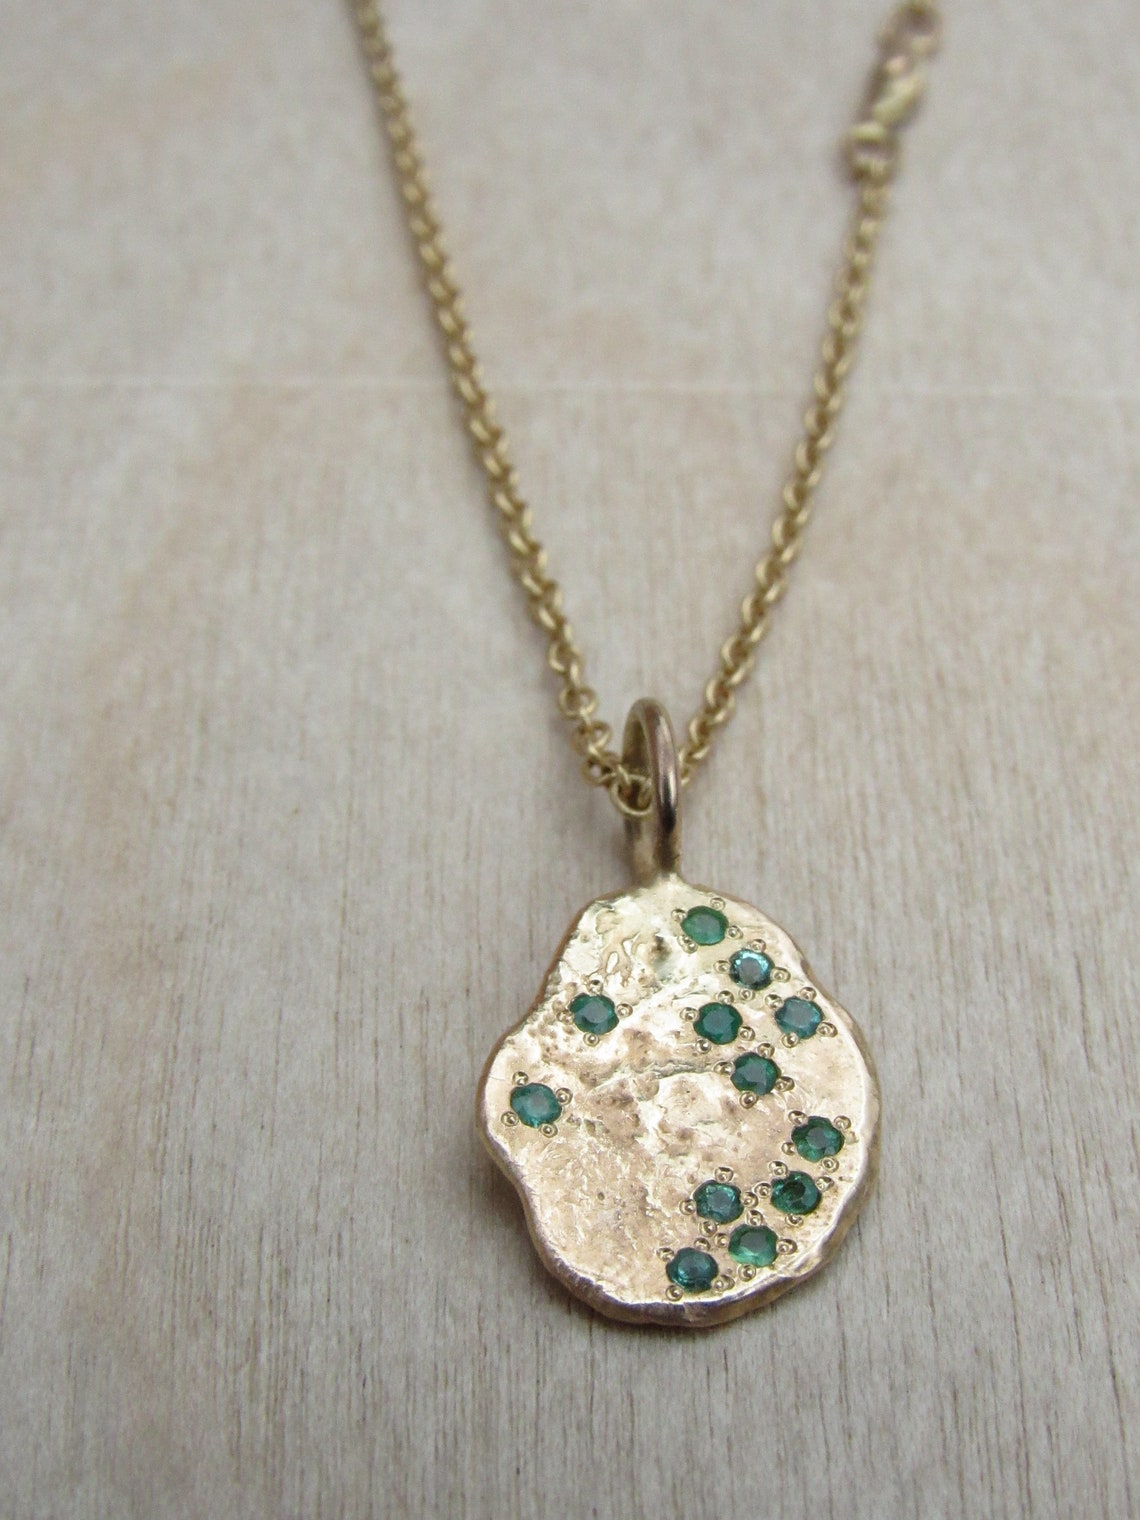 Gold Emerald Necklace. 14K Yellow Gold Necklace Pendant With - Etsy